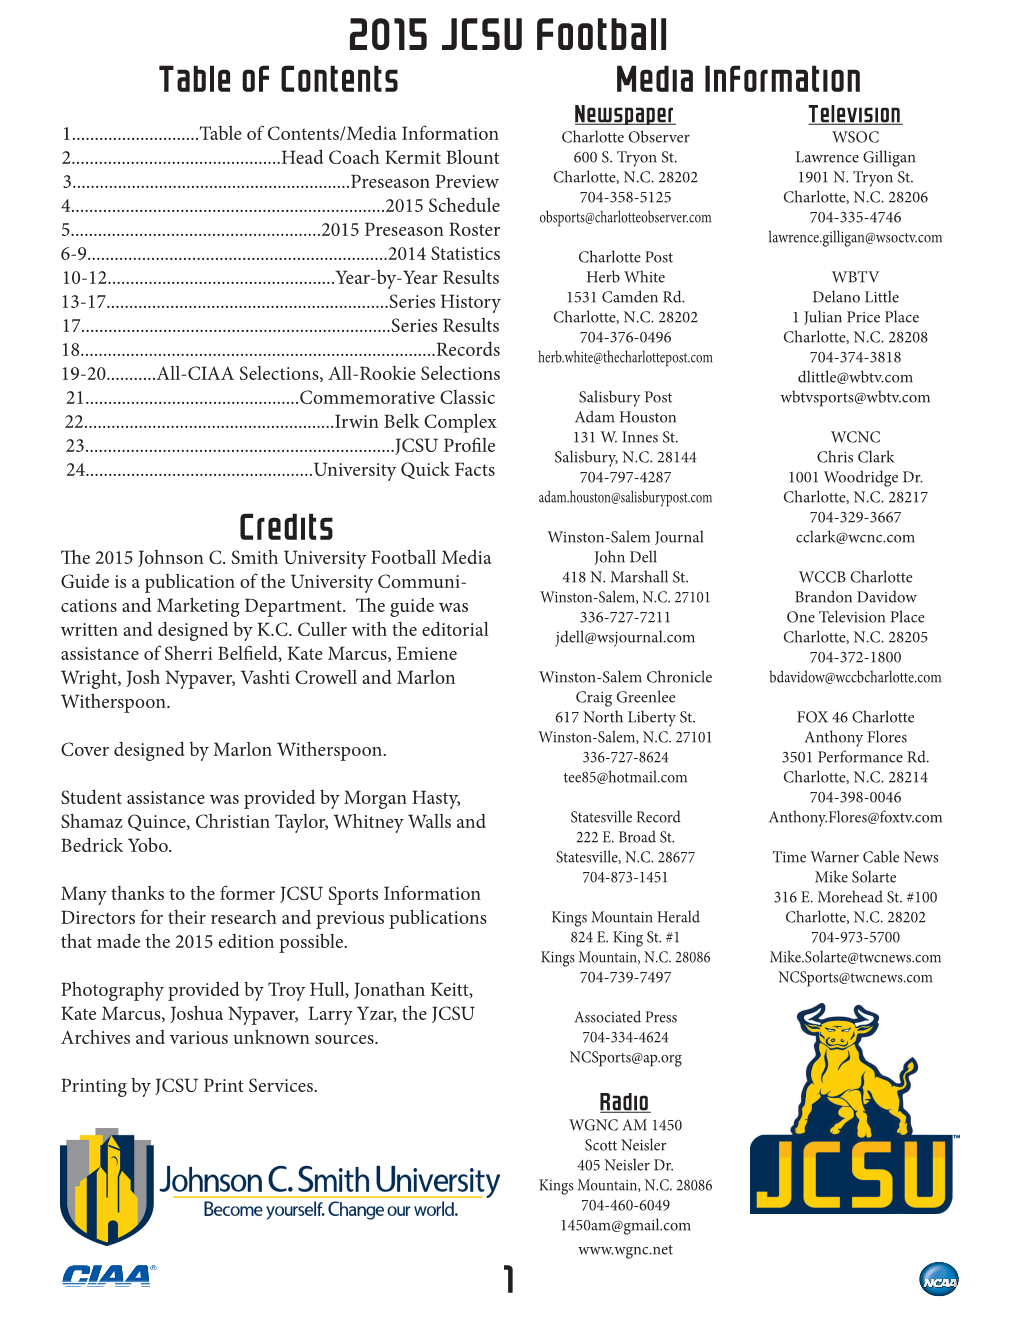 2015 JCSU Football Table of Contents Media Information Newspaper Television 1